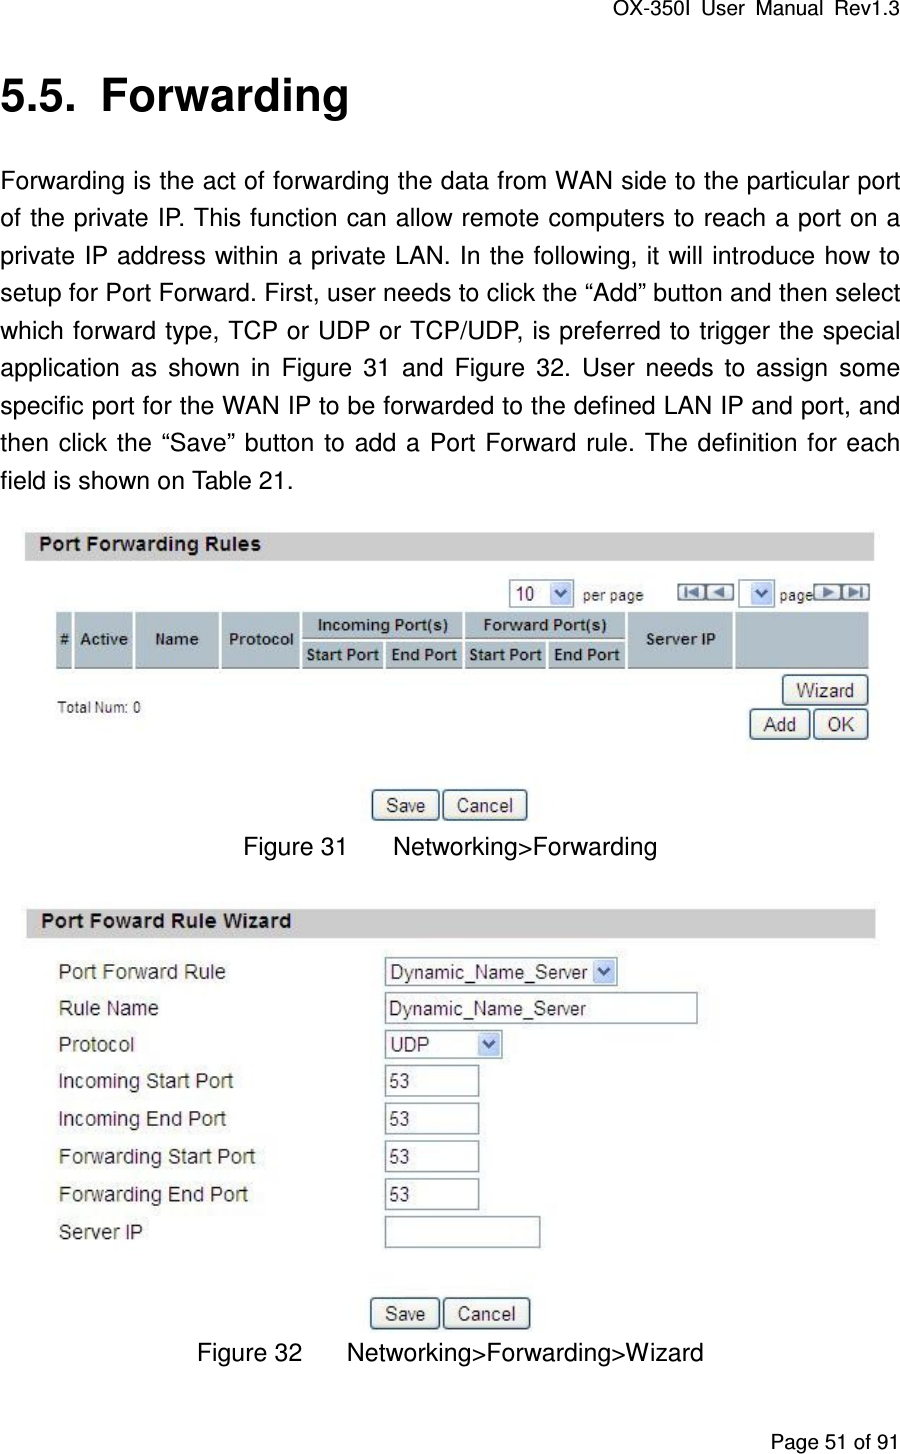 OX-350I  User  Manual  Rev1.3 Page 51 of 91 5.5.  Forwarding Forwarding is the act of forwarding the data from WAN side to the particular port of the private IP. This function can allow remote computers to reach a port on a private IP address within a private LAN. In the following, it will introduce how to setup for Port Forward. First, user needs to click the “Add” button and then select which forward type, TCP or UDP or TCP/UDP, is preferred to trigger the special application  as  shown  in  Figure  31  and  Figure  32.  User  needs  to  assign  some specific port for the WAN IP to be forwarded to the defined LAN IP and port, and then  click the “Save” button  to add a  Port  Forward rule. The definition for each field is shown on Table 21.  Figure 31  Networking&gt;Forwarding  Figure 32  Networking&gt;Forwarding&gt;Wizard 